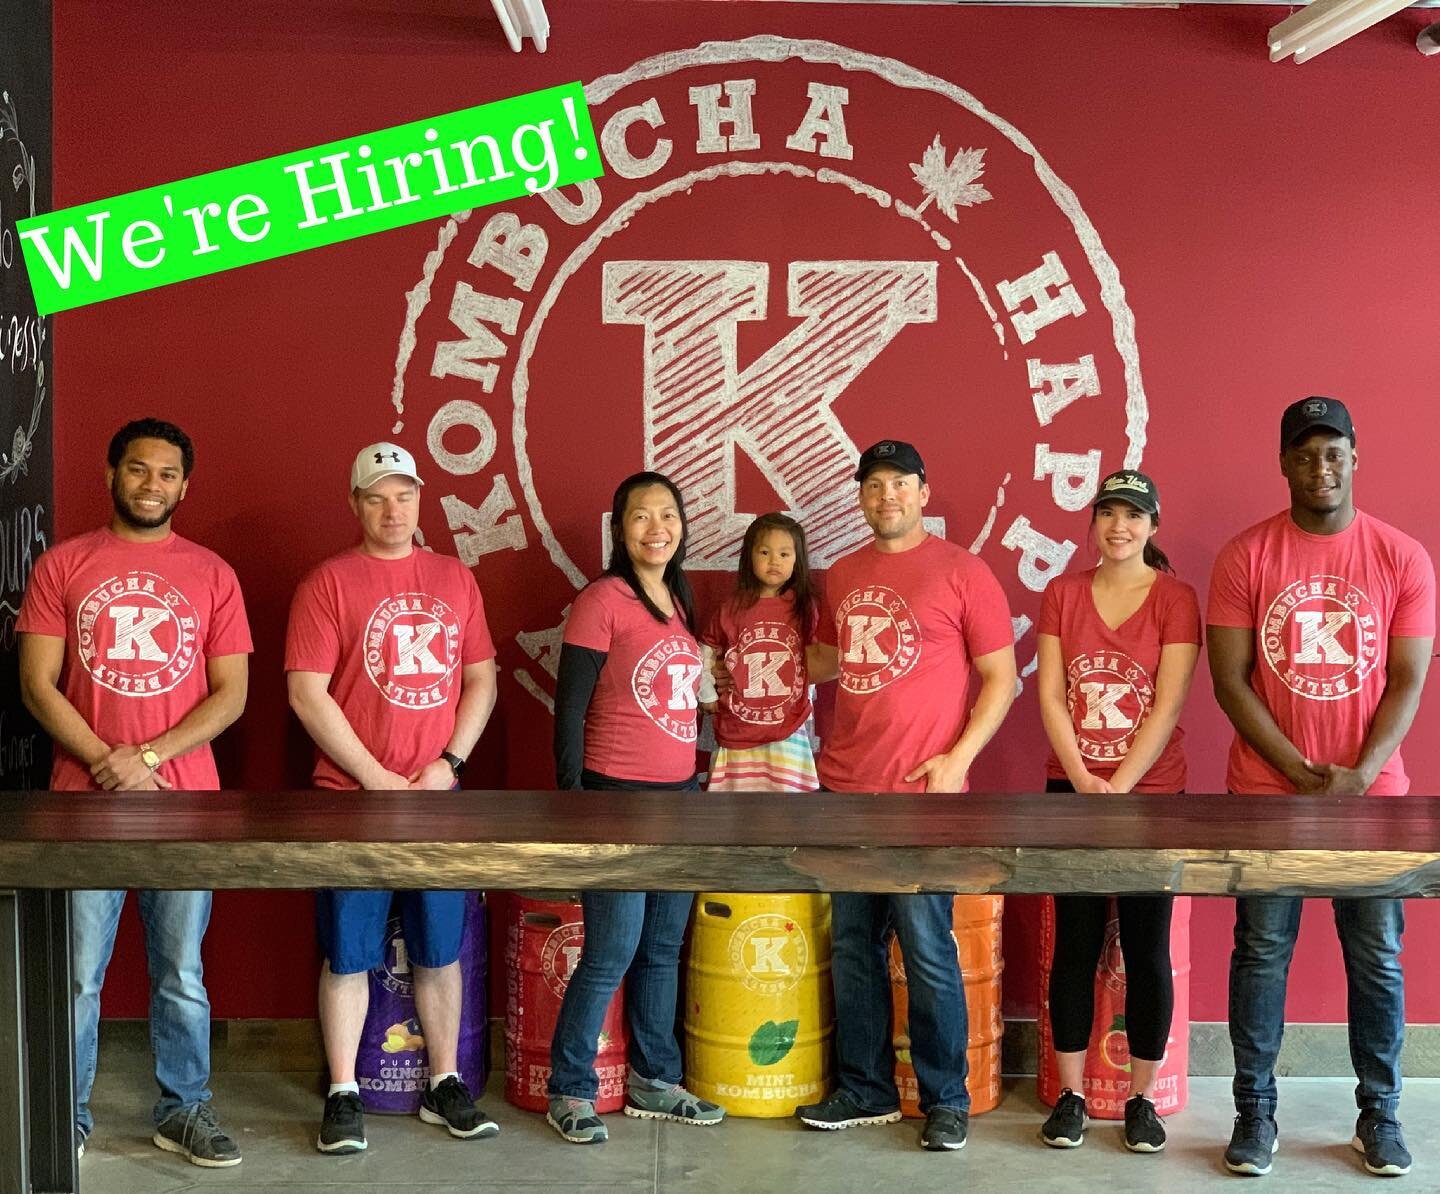 Happy Belly Kombucha is looking for an awesome addition to our Business Development Team! 💚We are currently hiring for a full time Account Manager. Head over to our website and scroll down to JOIN OUR TEAM to see the details. www.happybellykombucha.